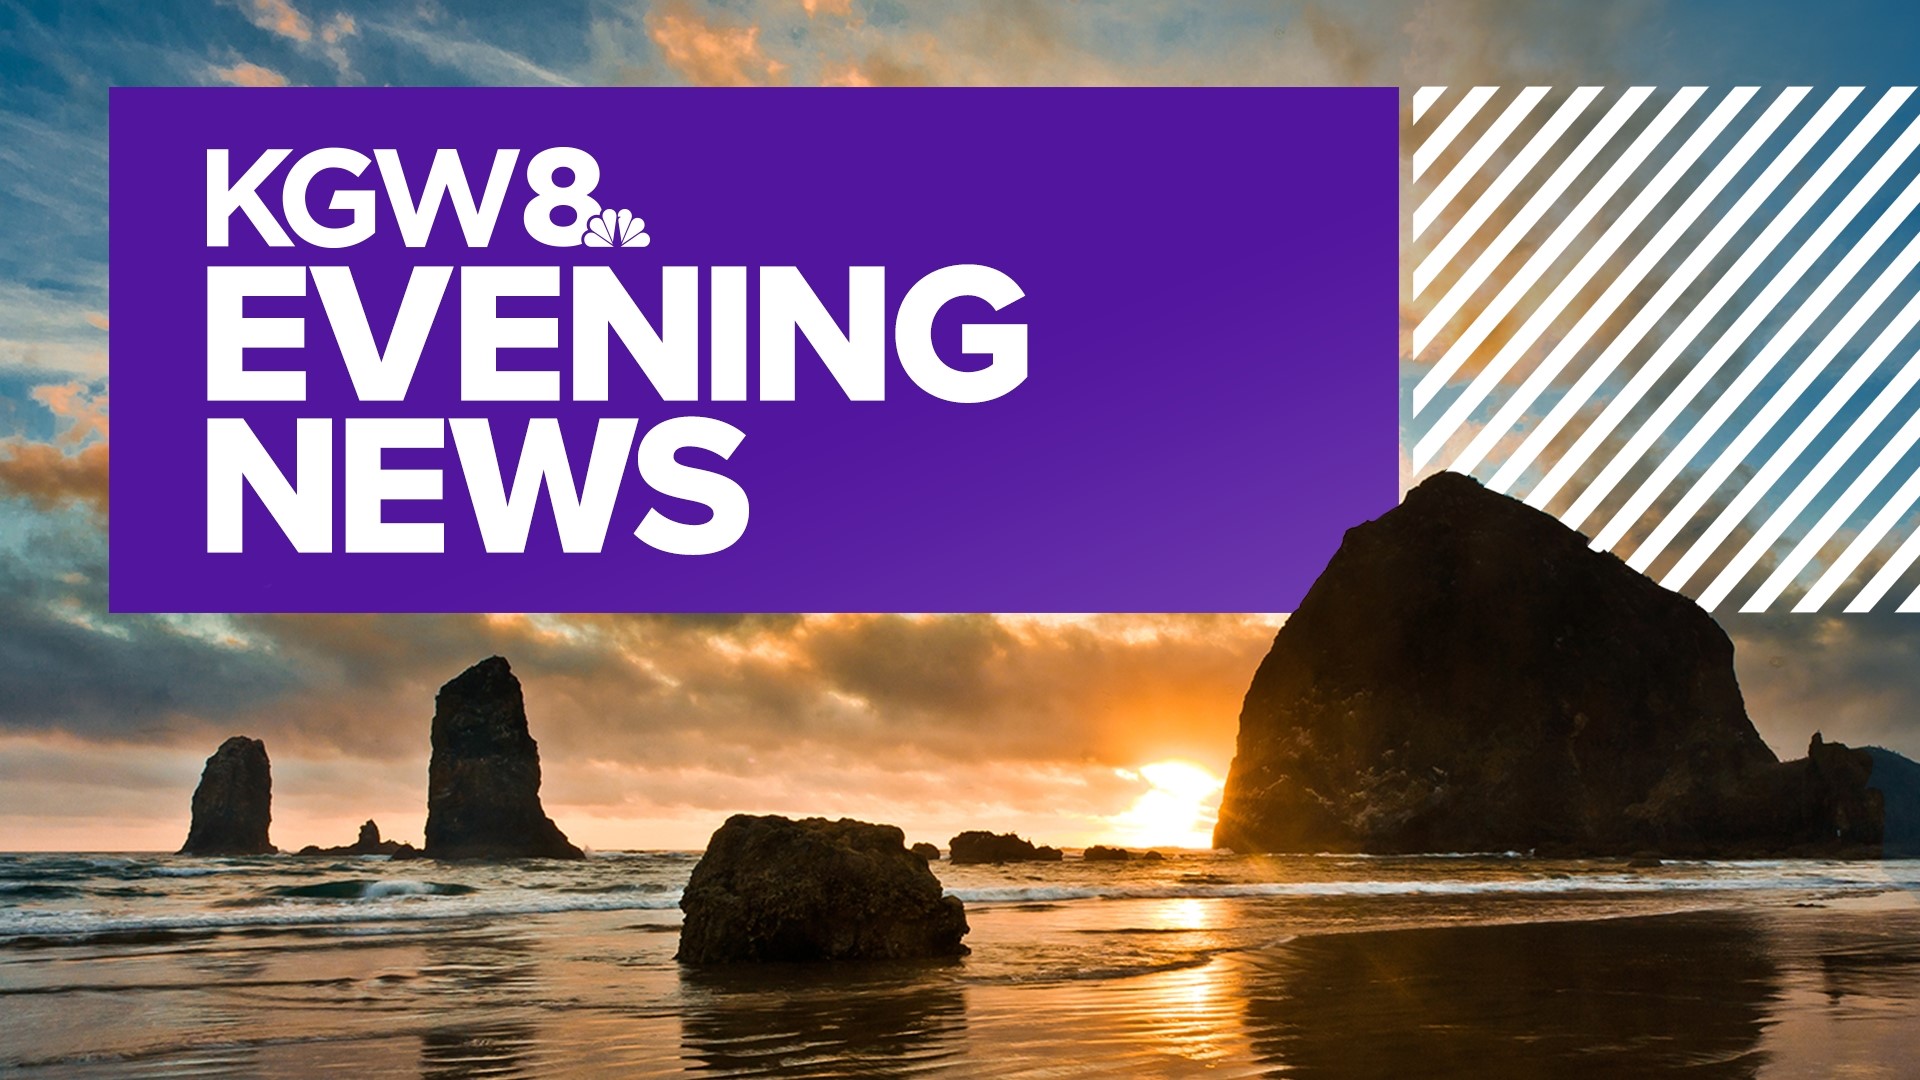 The major news of the day, plus the latest weather forecast